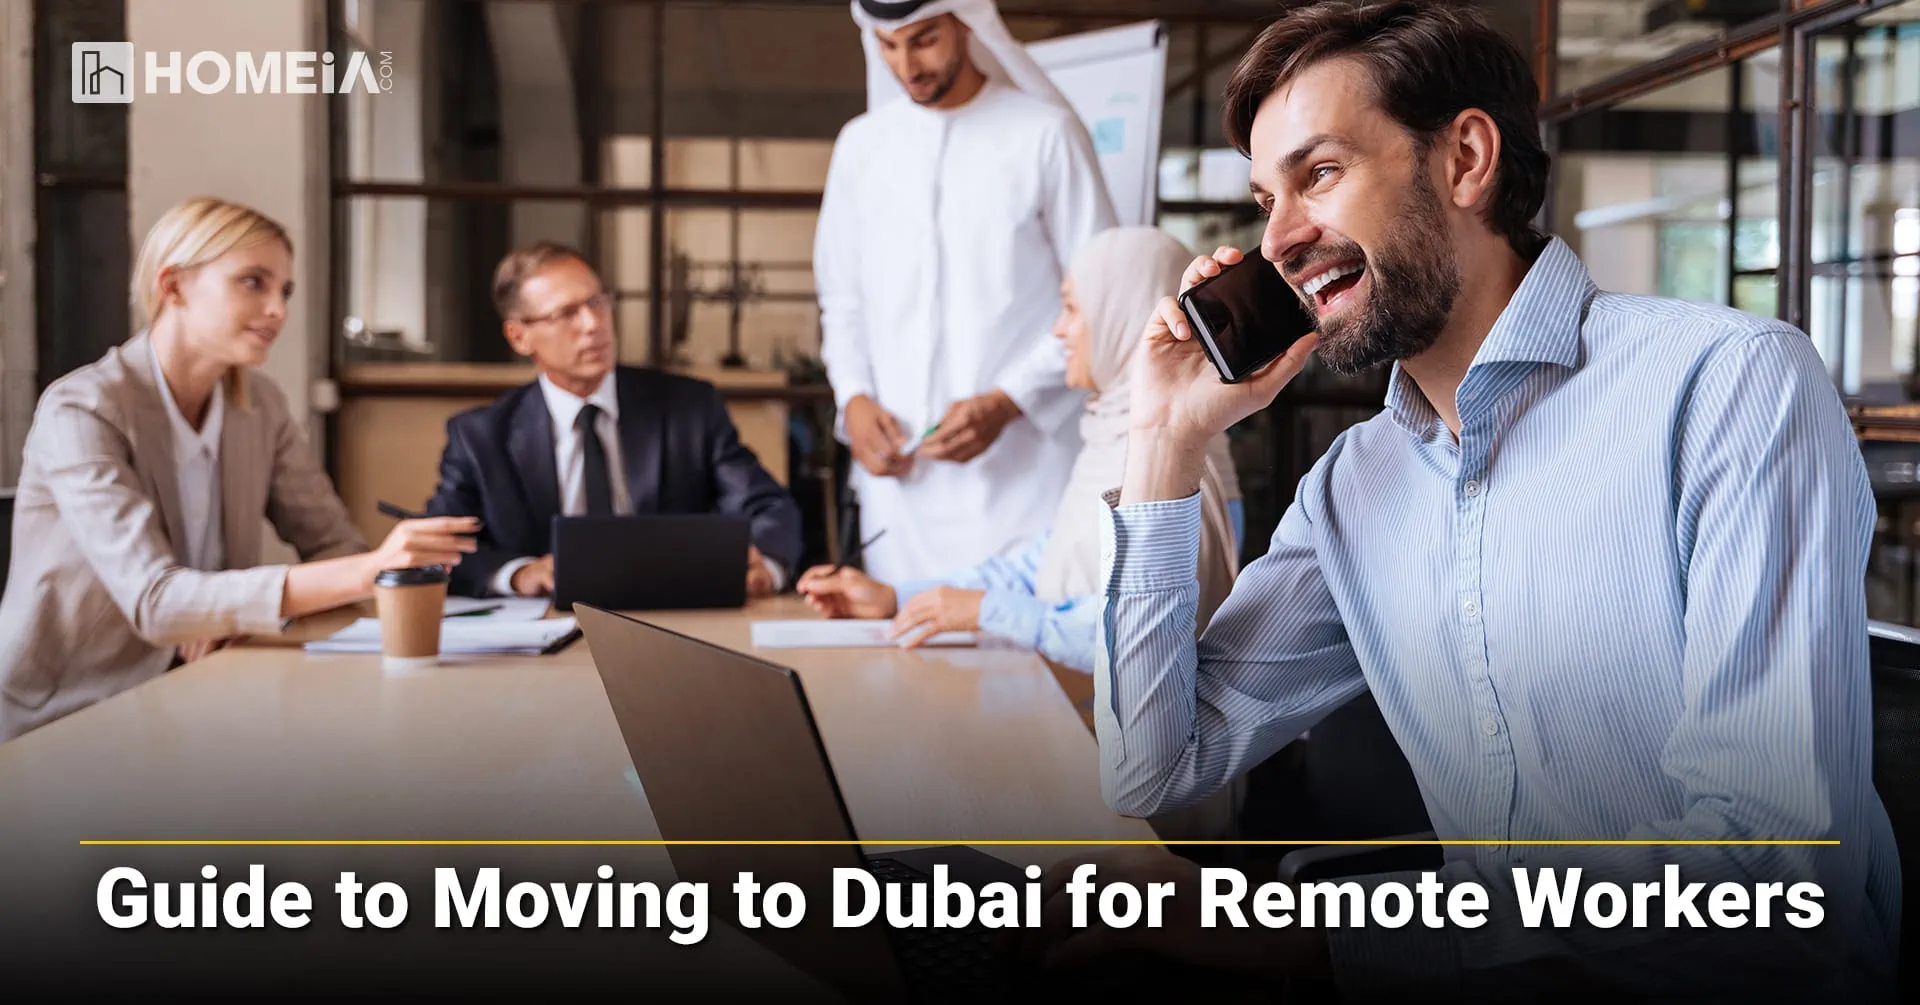 Guide to Moving to Dubai for Remote Workers